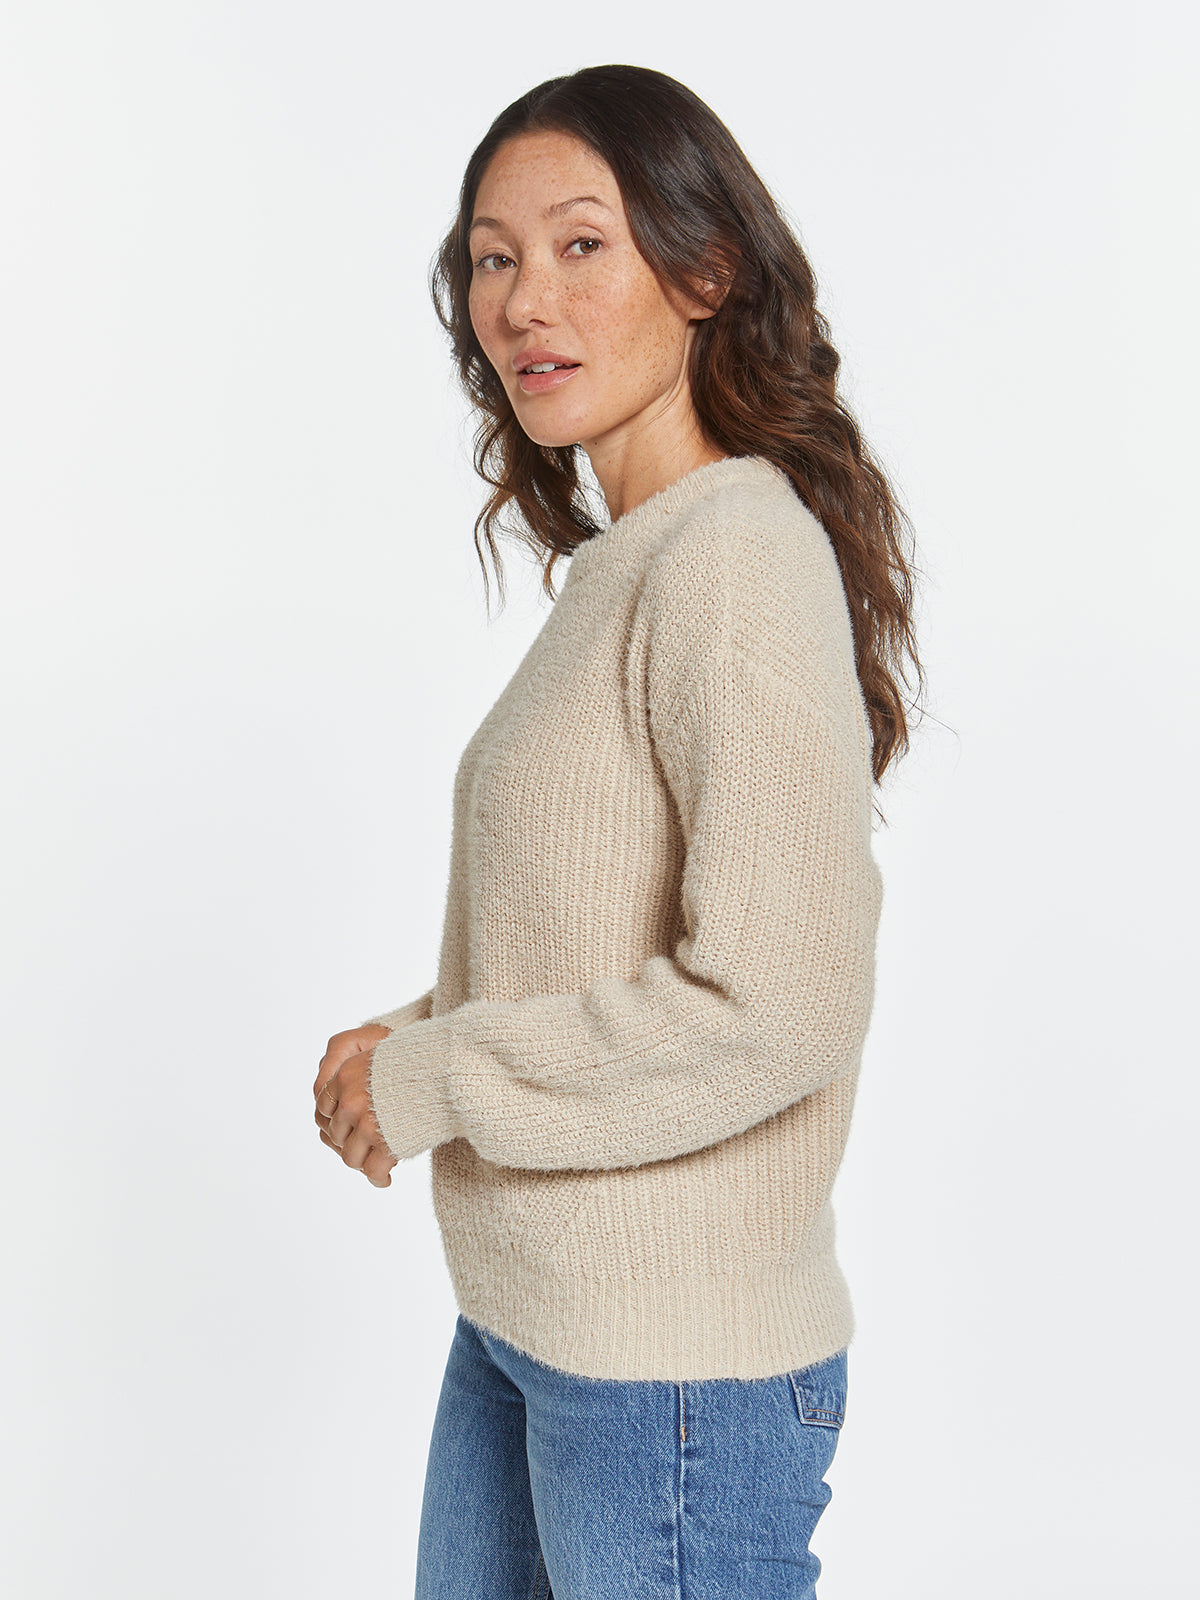 BELLE SWEATER - PRE PACK 6 UNITS